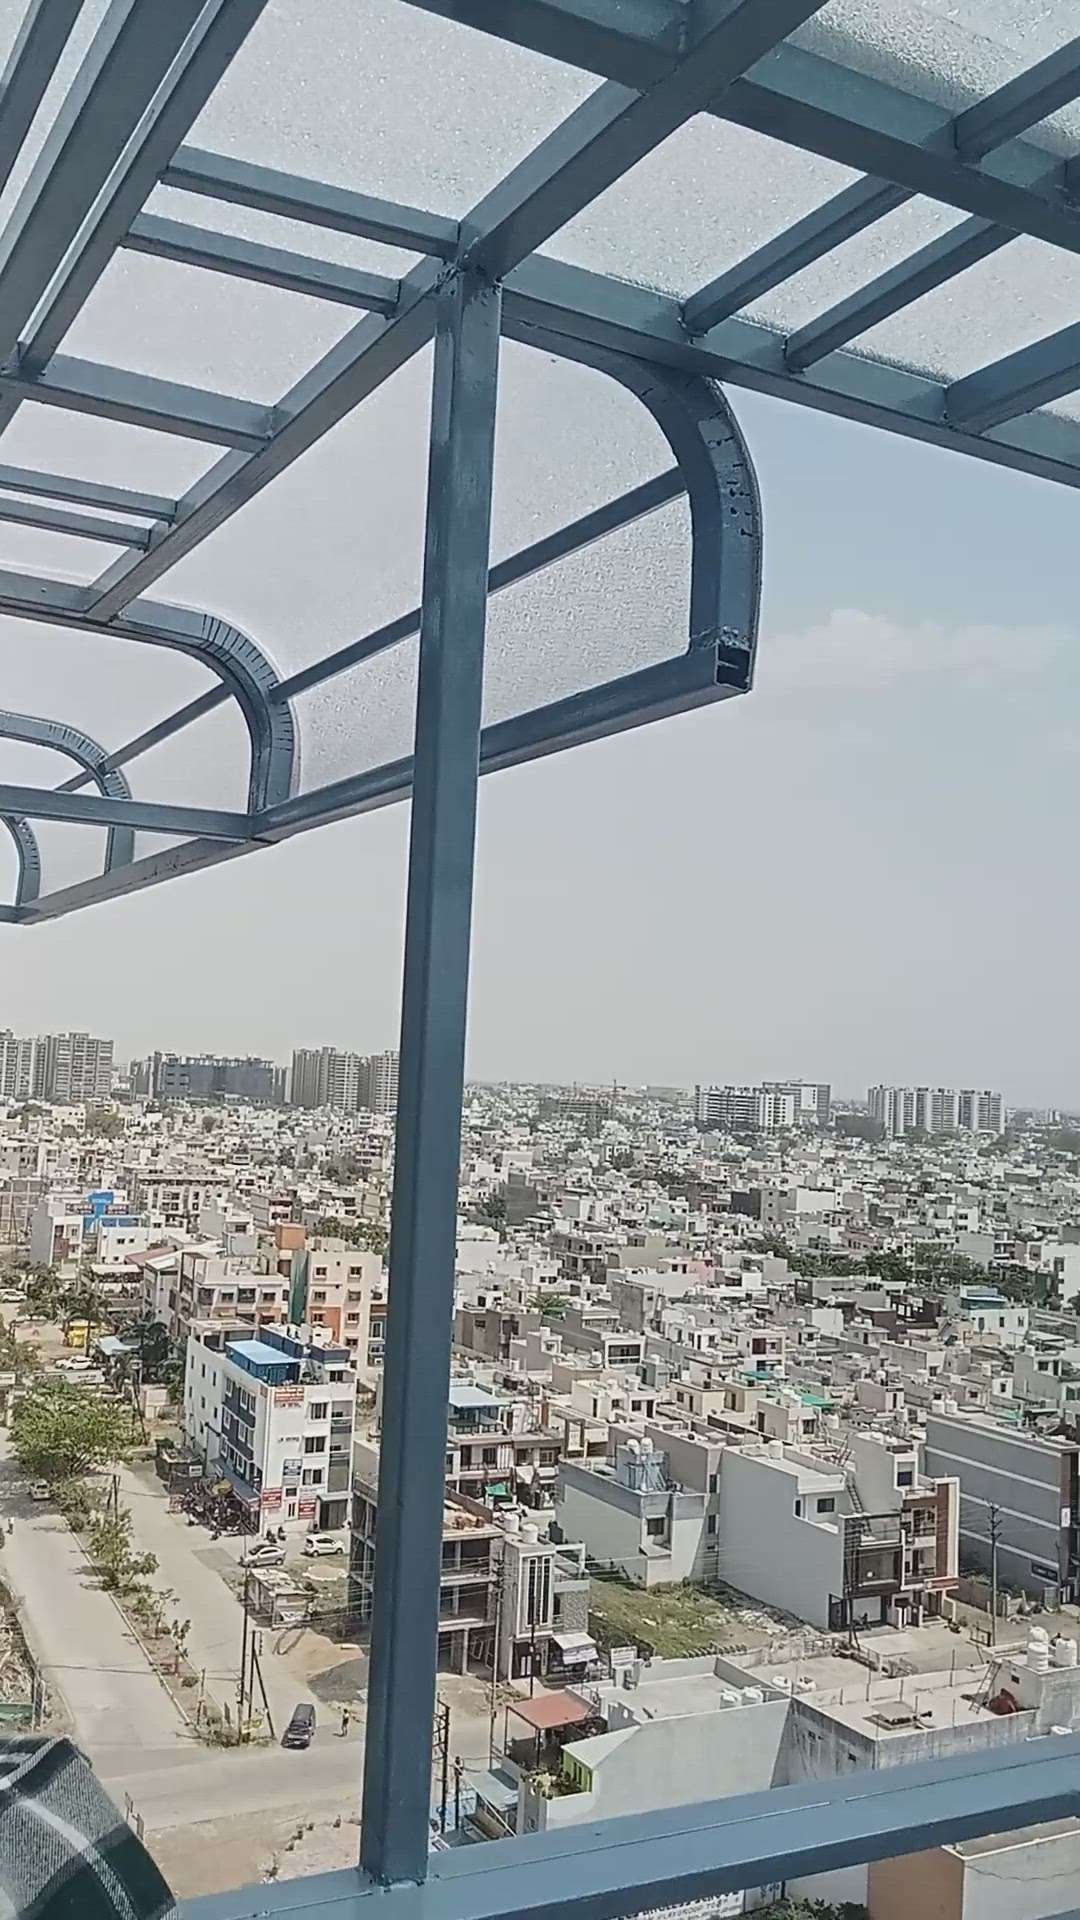 Bolcony shade with Polycarbonate sheet with TATA MS pipe on 13th floor at Elite Apex Mahalaxmi Nagar indore